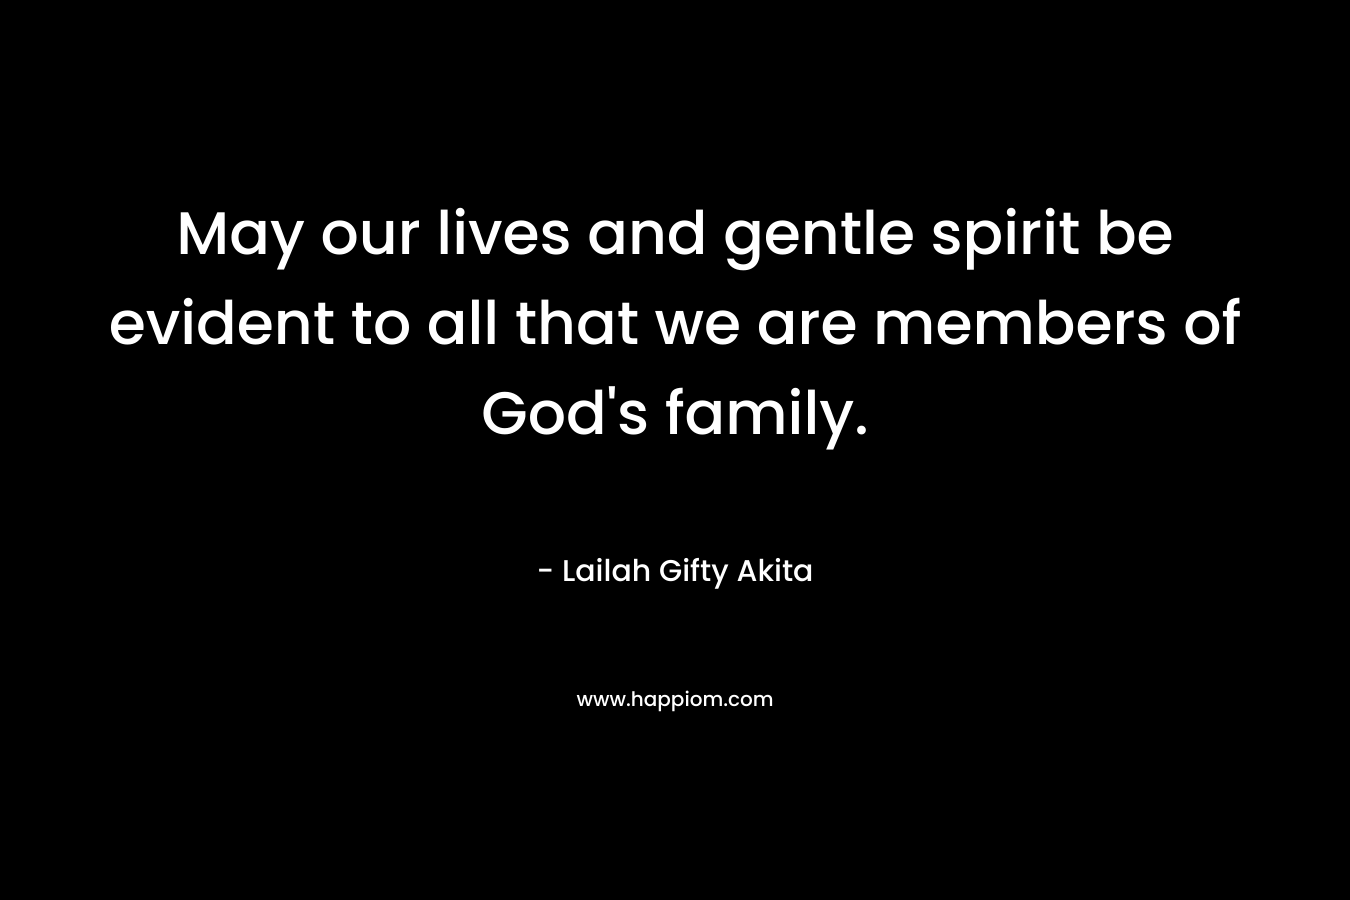 May our lives and gentle spirit be evident to all that we are members of God’s family. – Lailah Gifty Akita